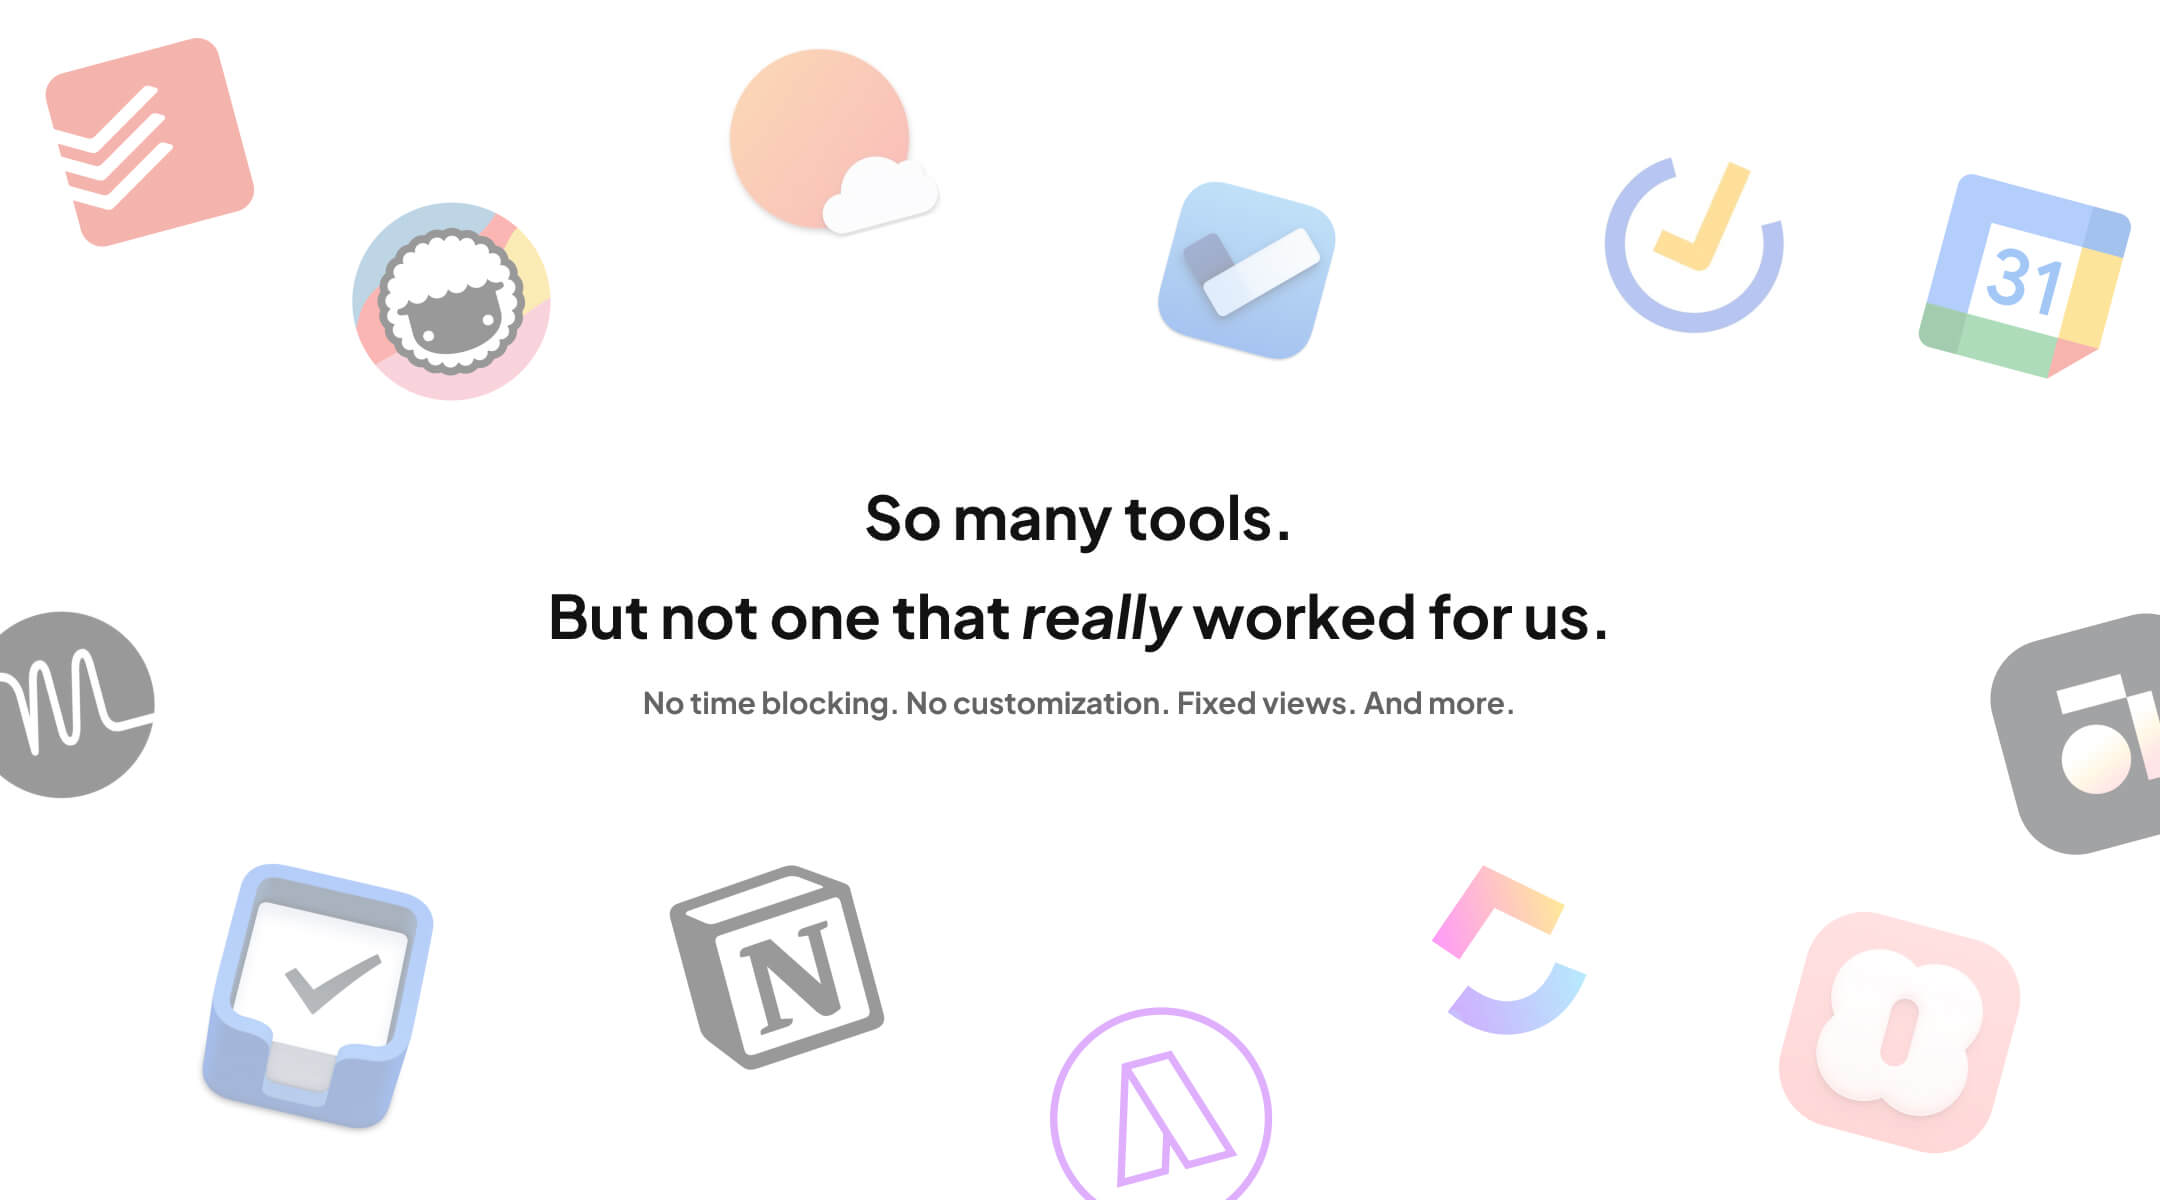 Gallery of different productivity tools and a message in the middle saying so many tools, but not one that really works for us